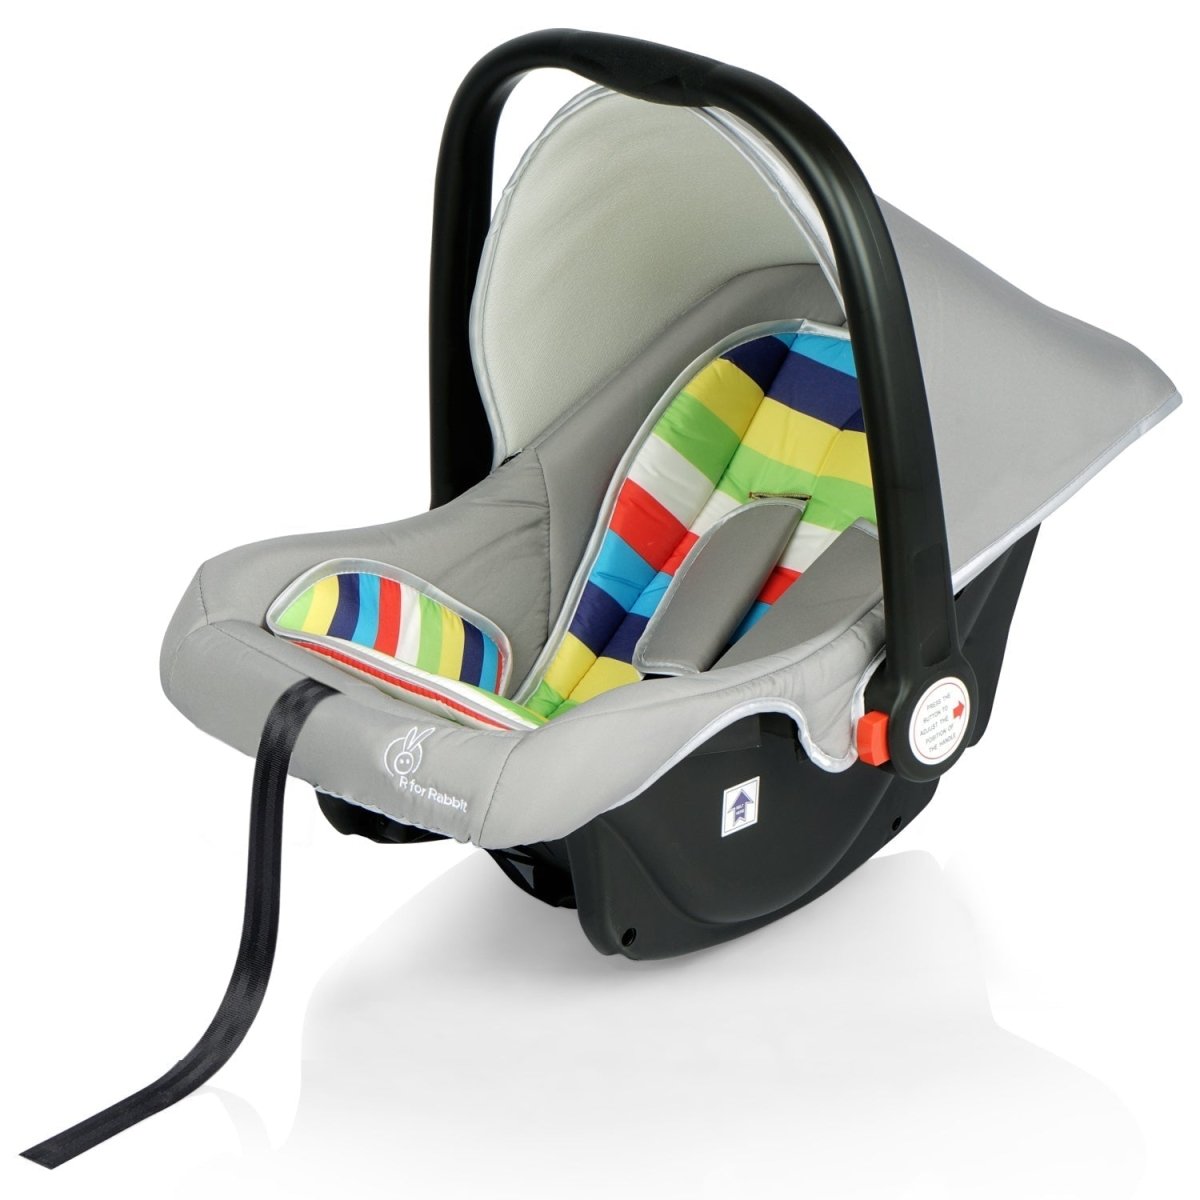 R for Rabbit Picaboo Baby Car Seats Rainbow - ICPBRB1